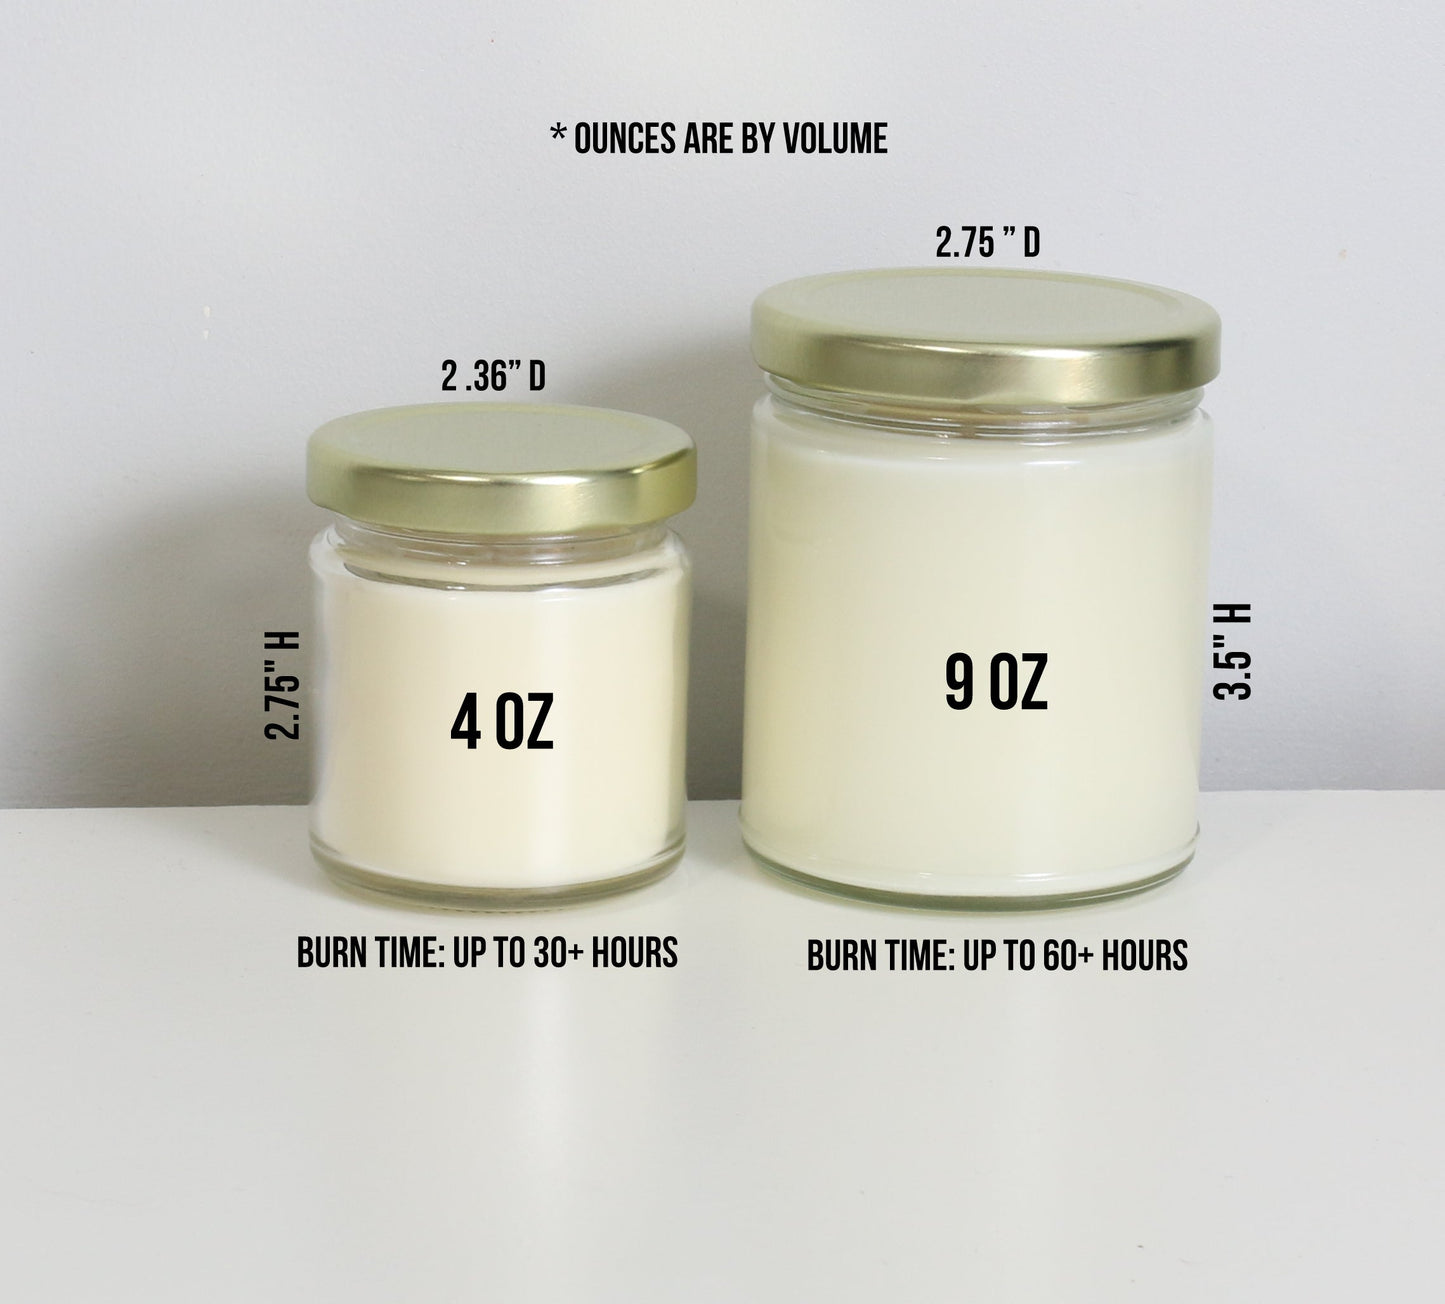 Look At You Turning 40 and Shit Soy Candle - Choose Your Scent - Birthday Gift